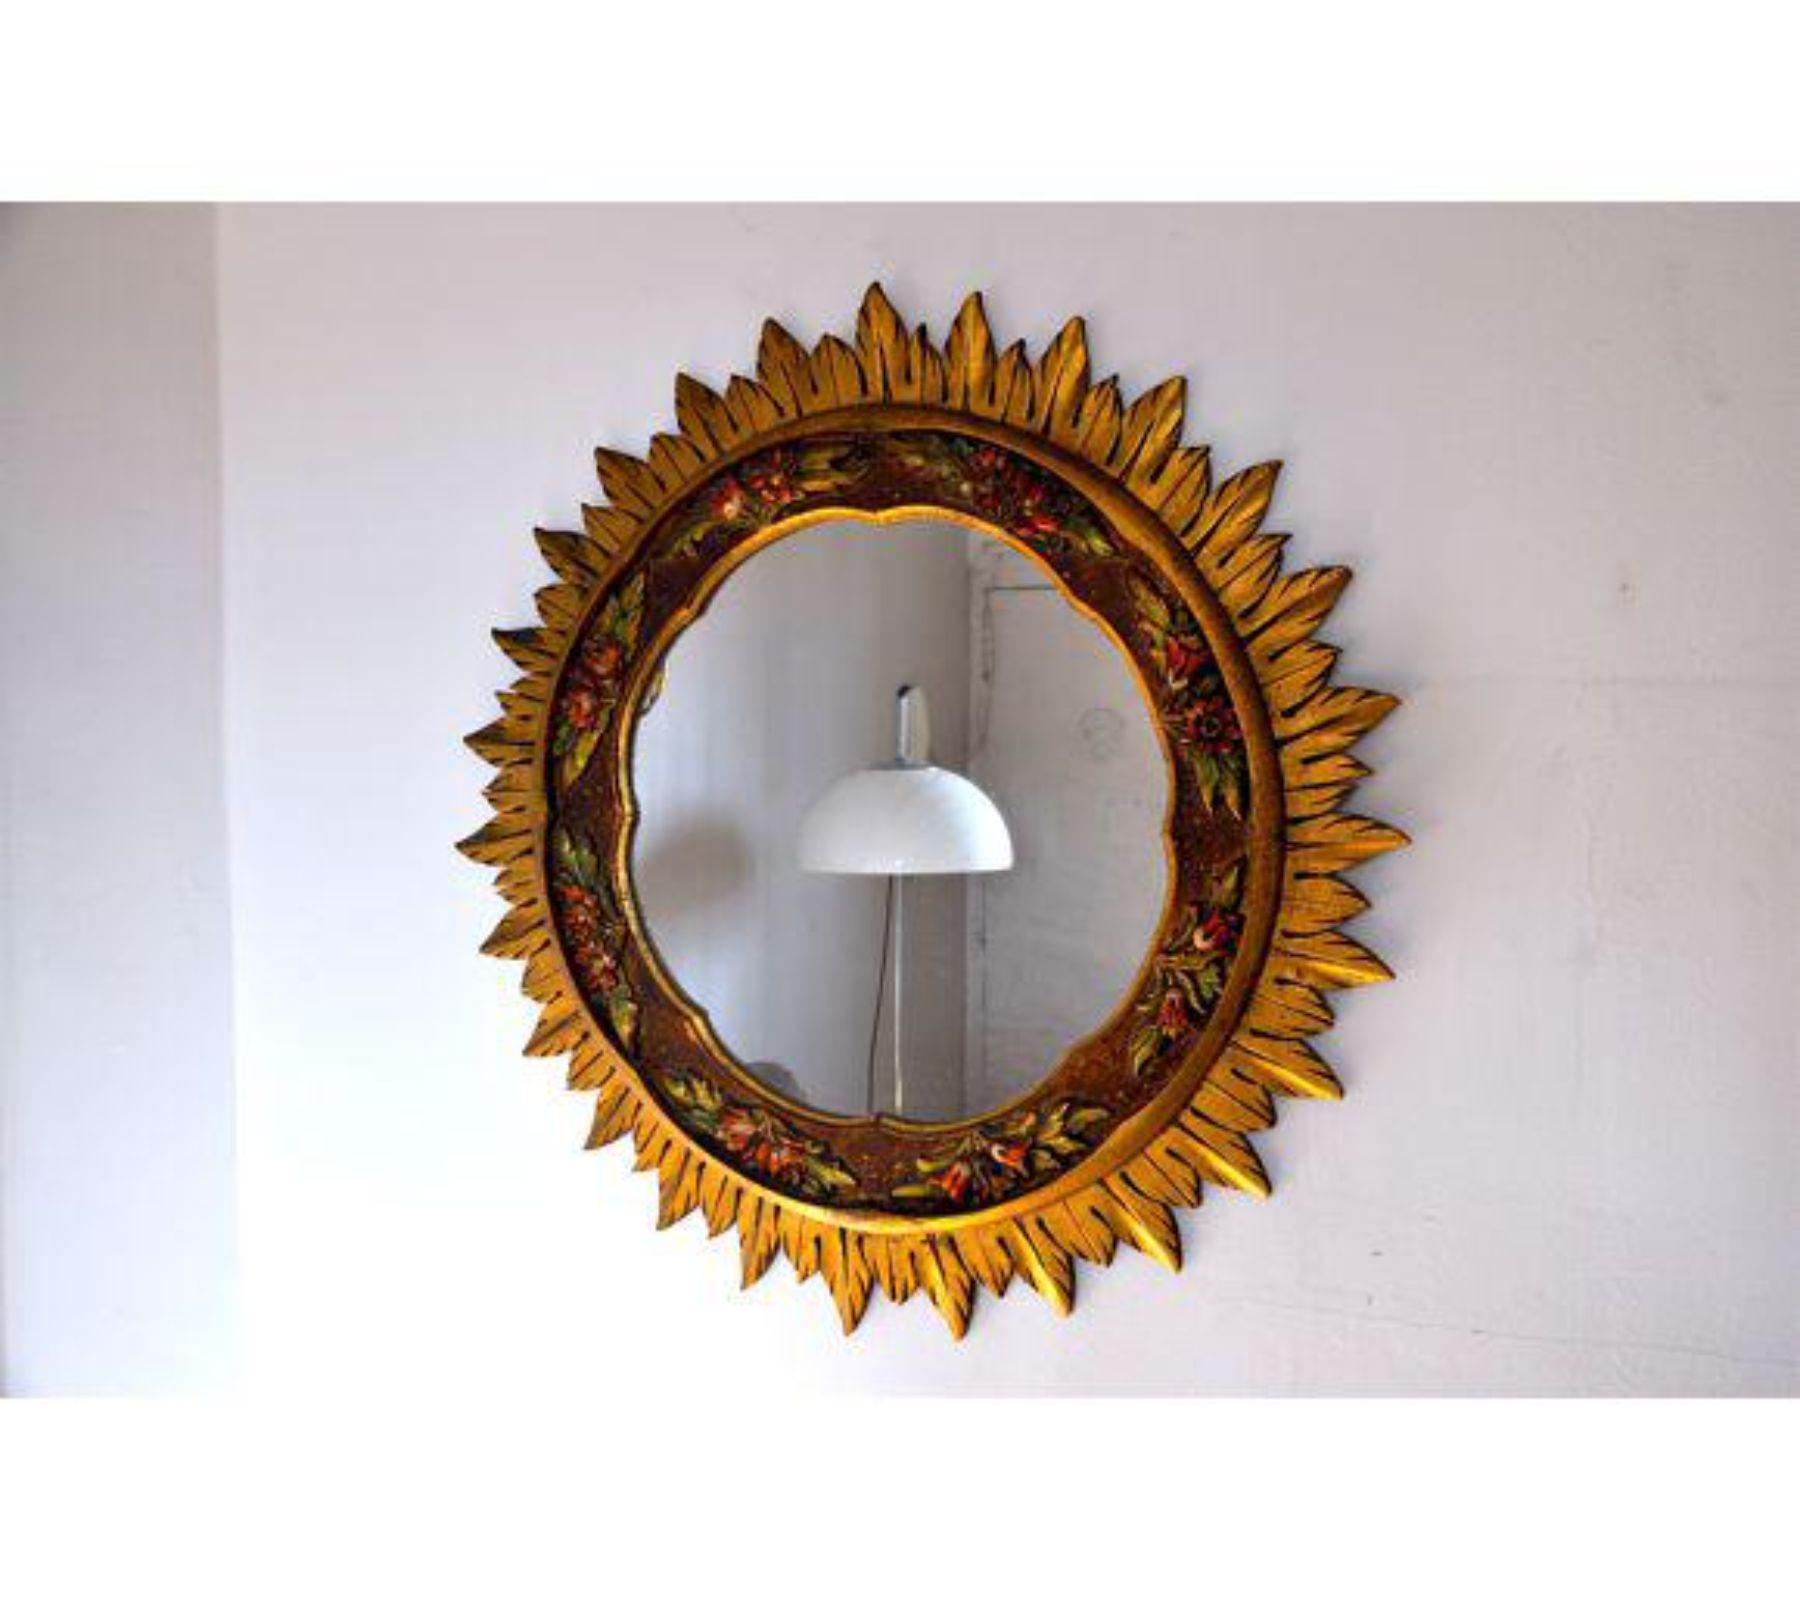 Large gold sunburst wodden mirror designed and hand crafter in France in 1960. Superb wood work with floral representation, unique by its size. A unique piece of design that will be great a highlight to your interior project. Object in mint